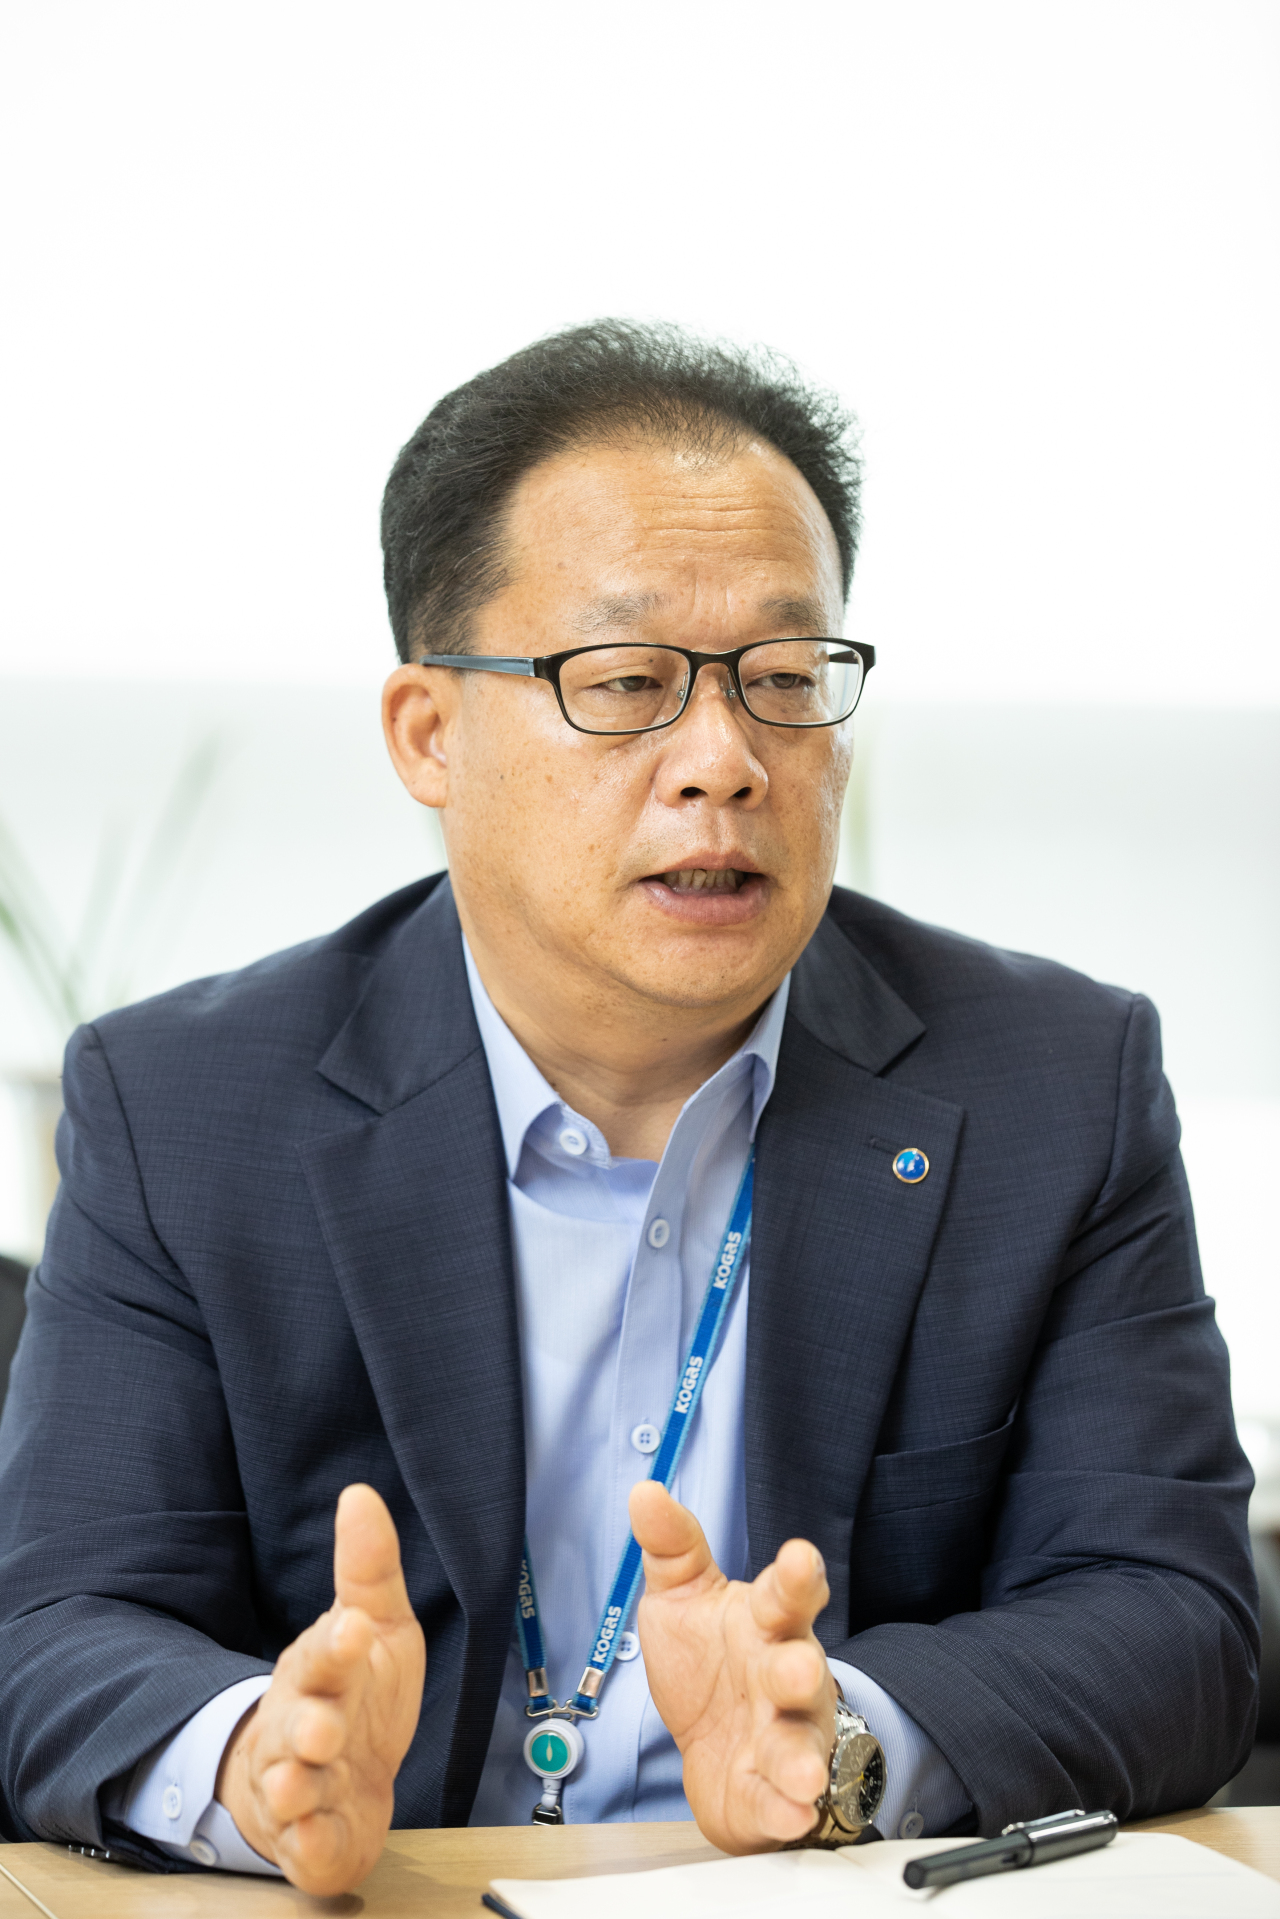 Yang Jin-yul, the executive vice president and head of the hydrogen business division at Korea Gas Corp., speaks during an interview with The Korea Herald. (Kogas)